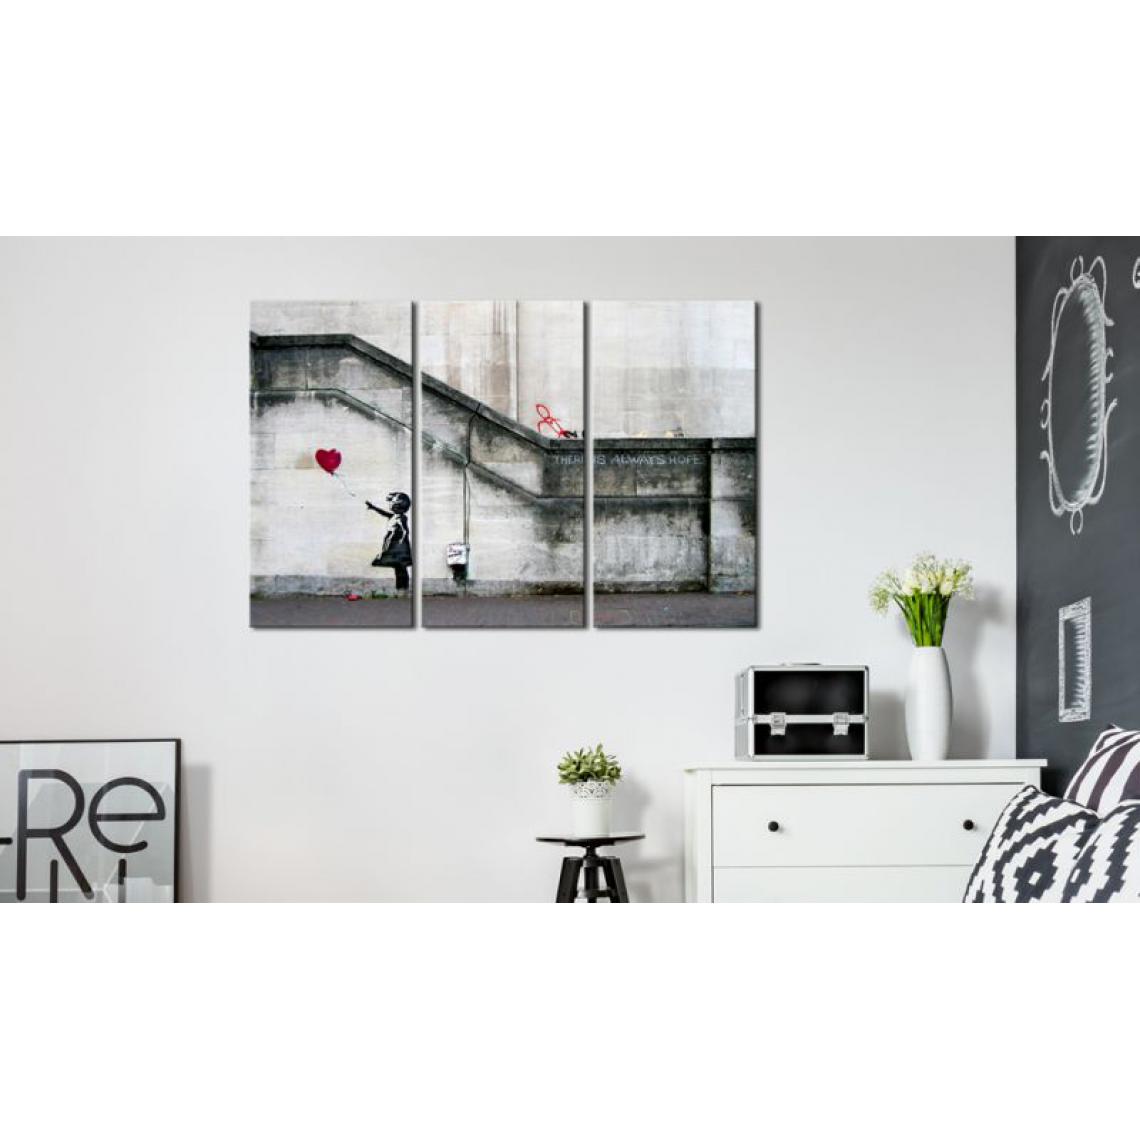 Artgeist - Tableau - Girl With a Balloon by Banksy .Taille : 90x60 - Tableaux, peintures